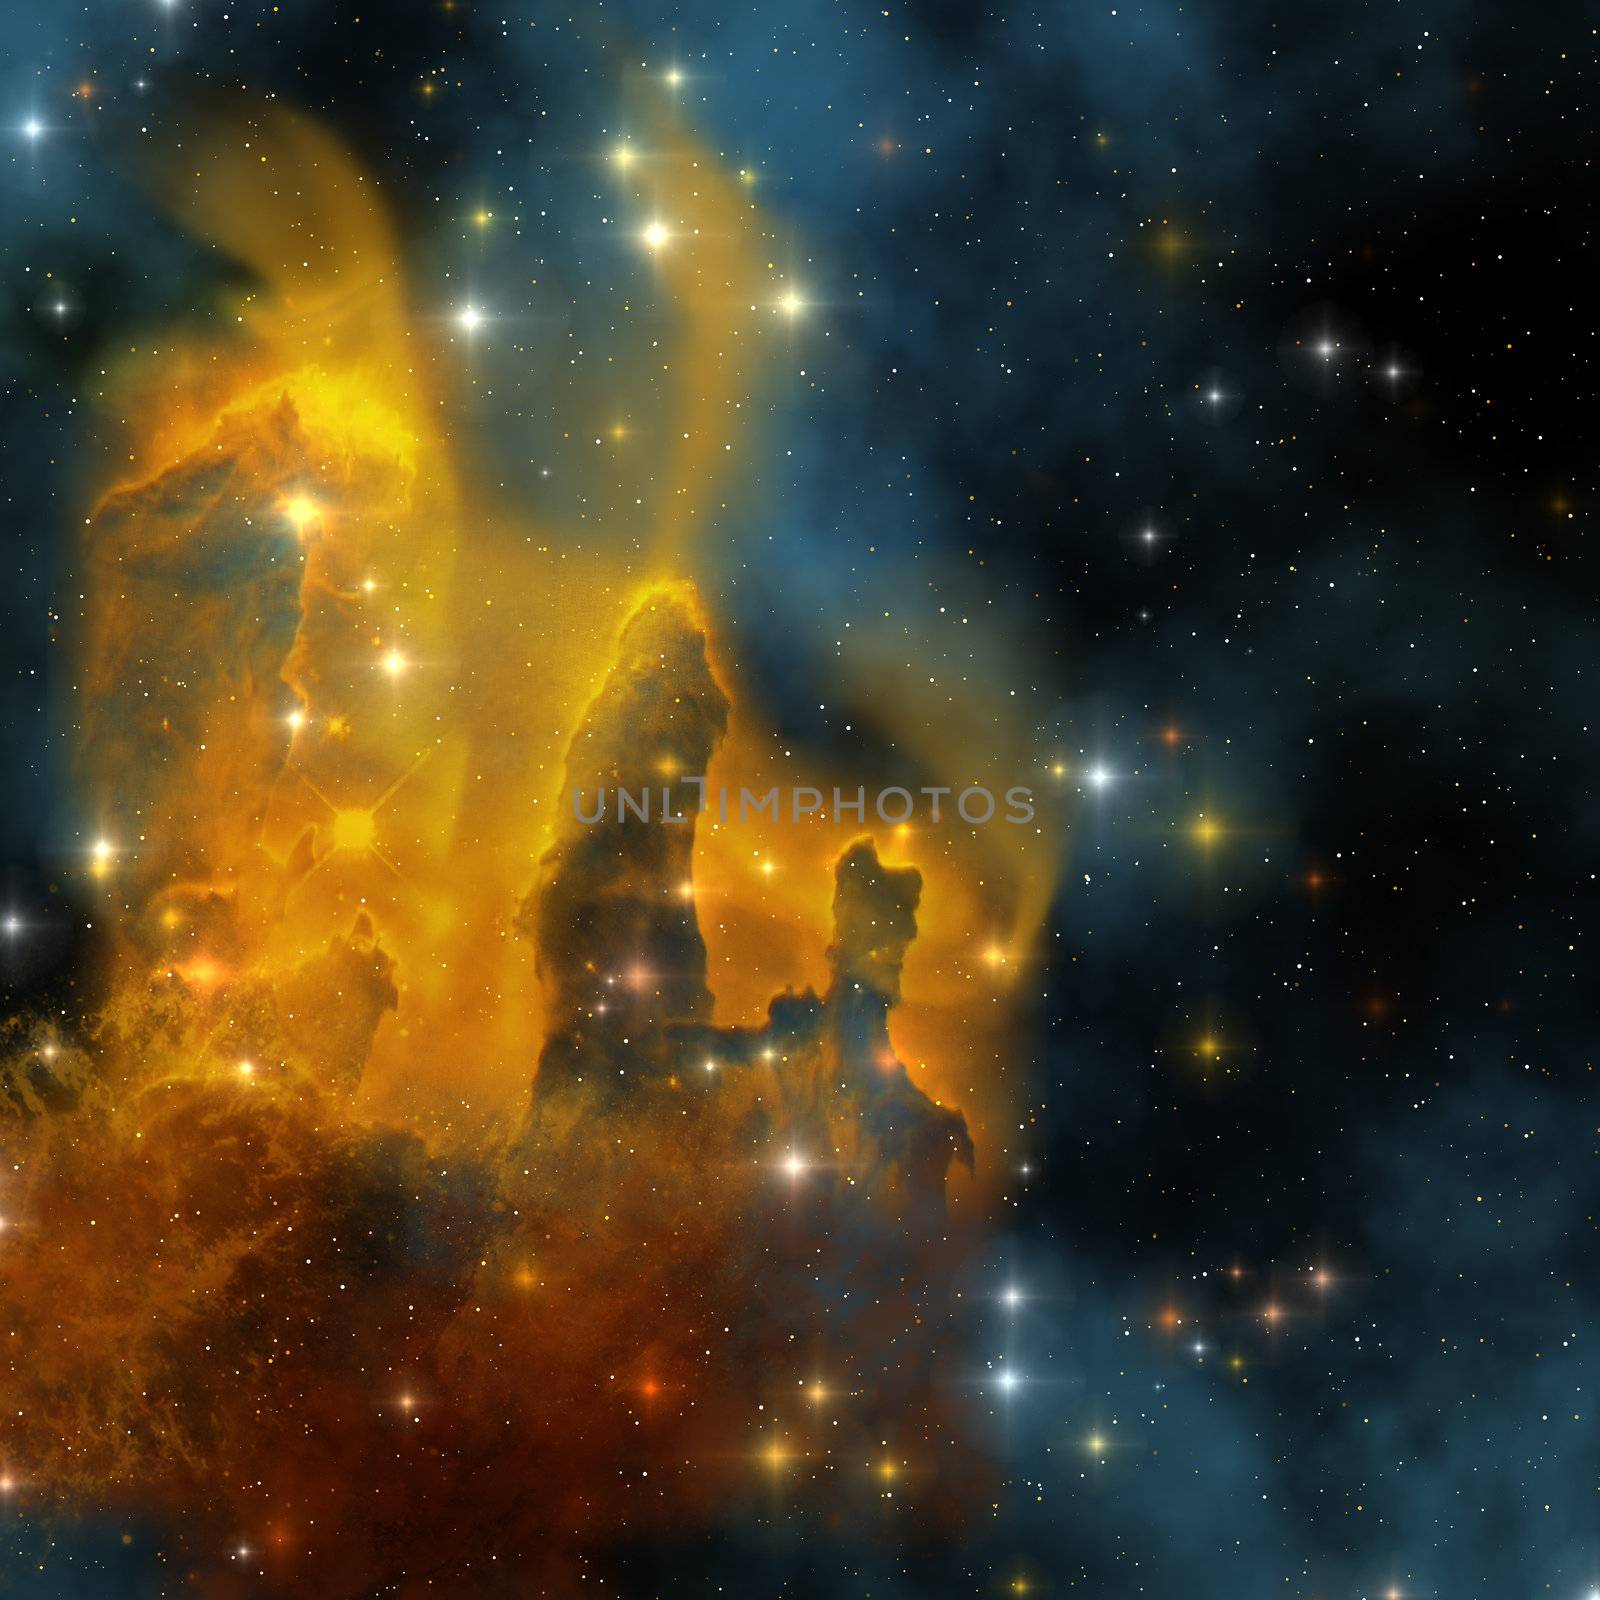 The famous colorful nebula shines bright with star making in its clouds.